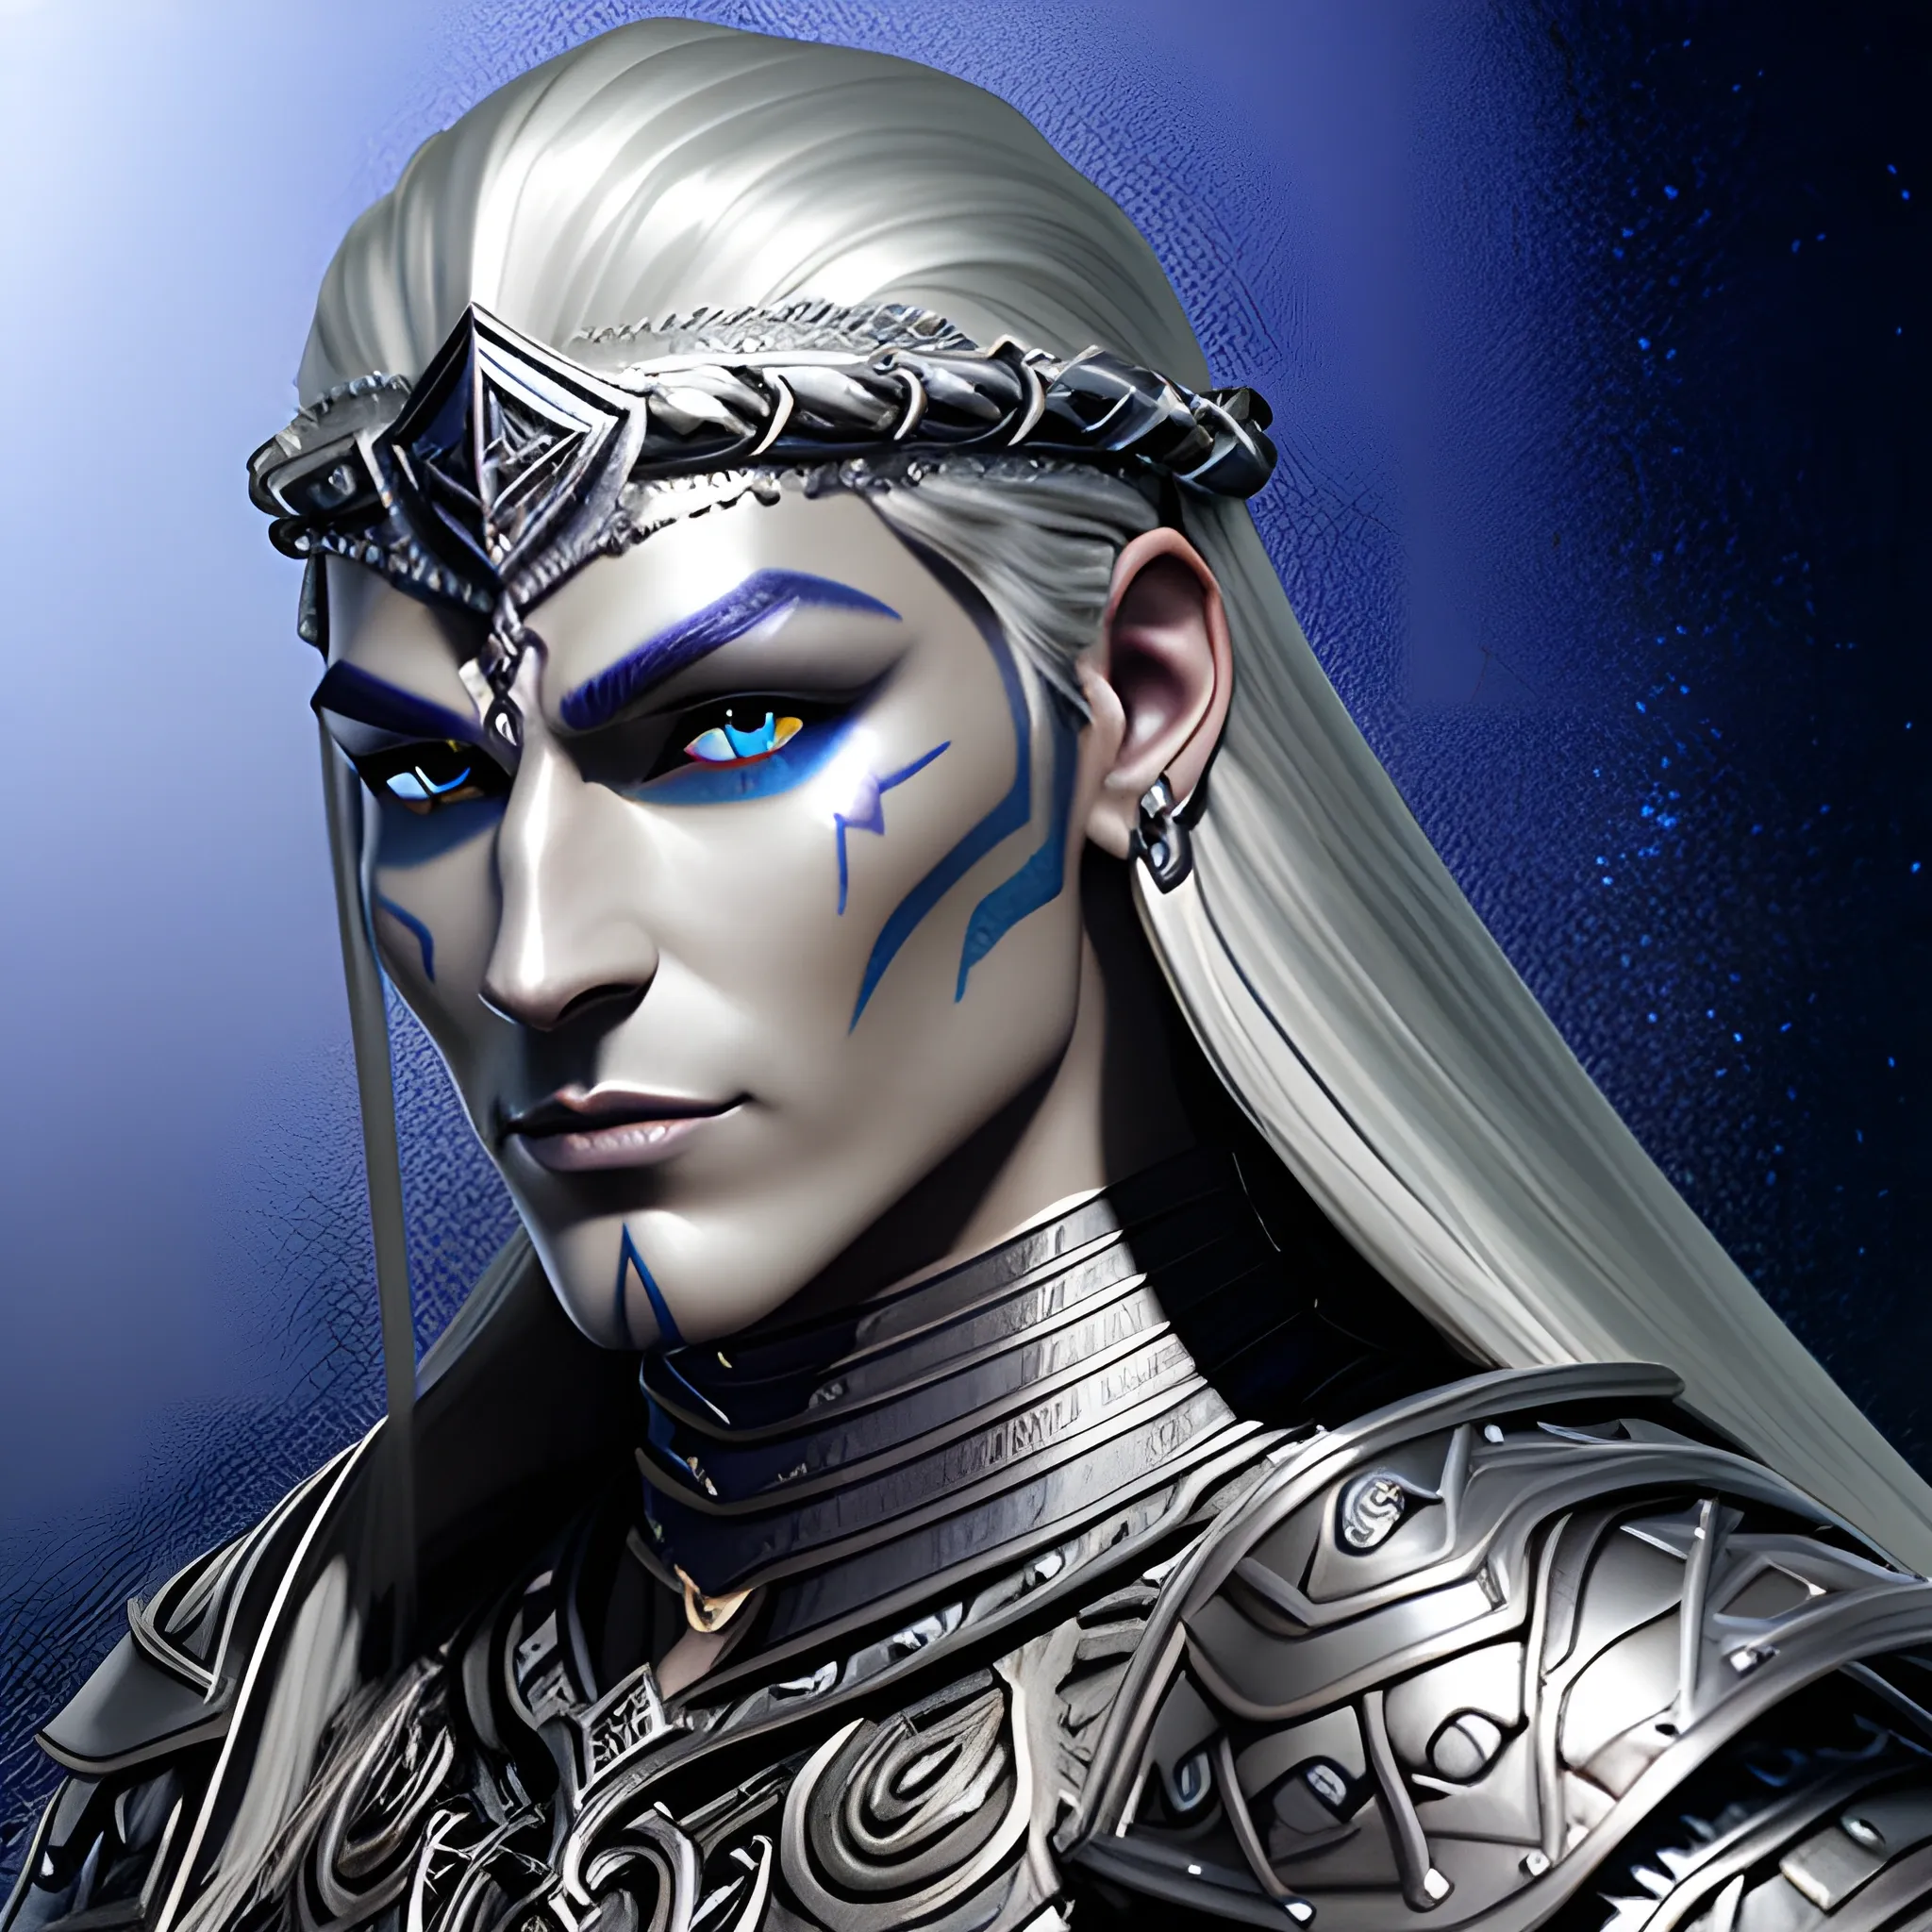 fantasy, paladin, warrior, metal skin, male, long black hair, icy eyes, blue eyes, intricate light silver armor, smiling, hyper realistic, 3D, dungeons and dragons, elegant, mysterious, strong, armed, black hair, Oil Painting, filigree skin, silver skin, silver flame necklace, grey skin, iron skin, platinum skin, human ears, Oil Painting, young, handsome, thin tribal facial tattoos, steel eyes, face tattoo, polynesian complex facial tattoo scarring, aluminium skin